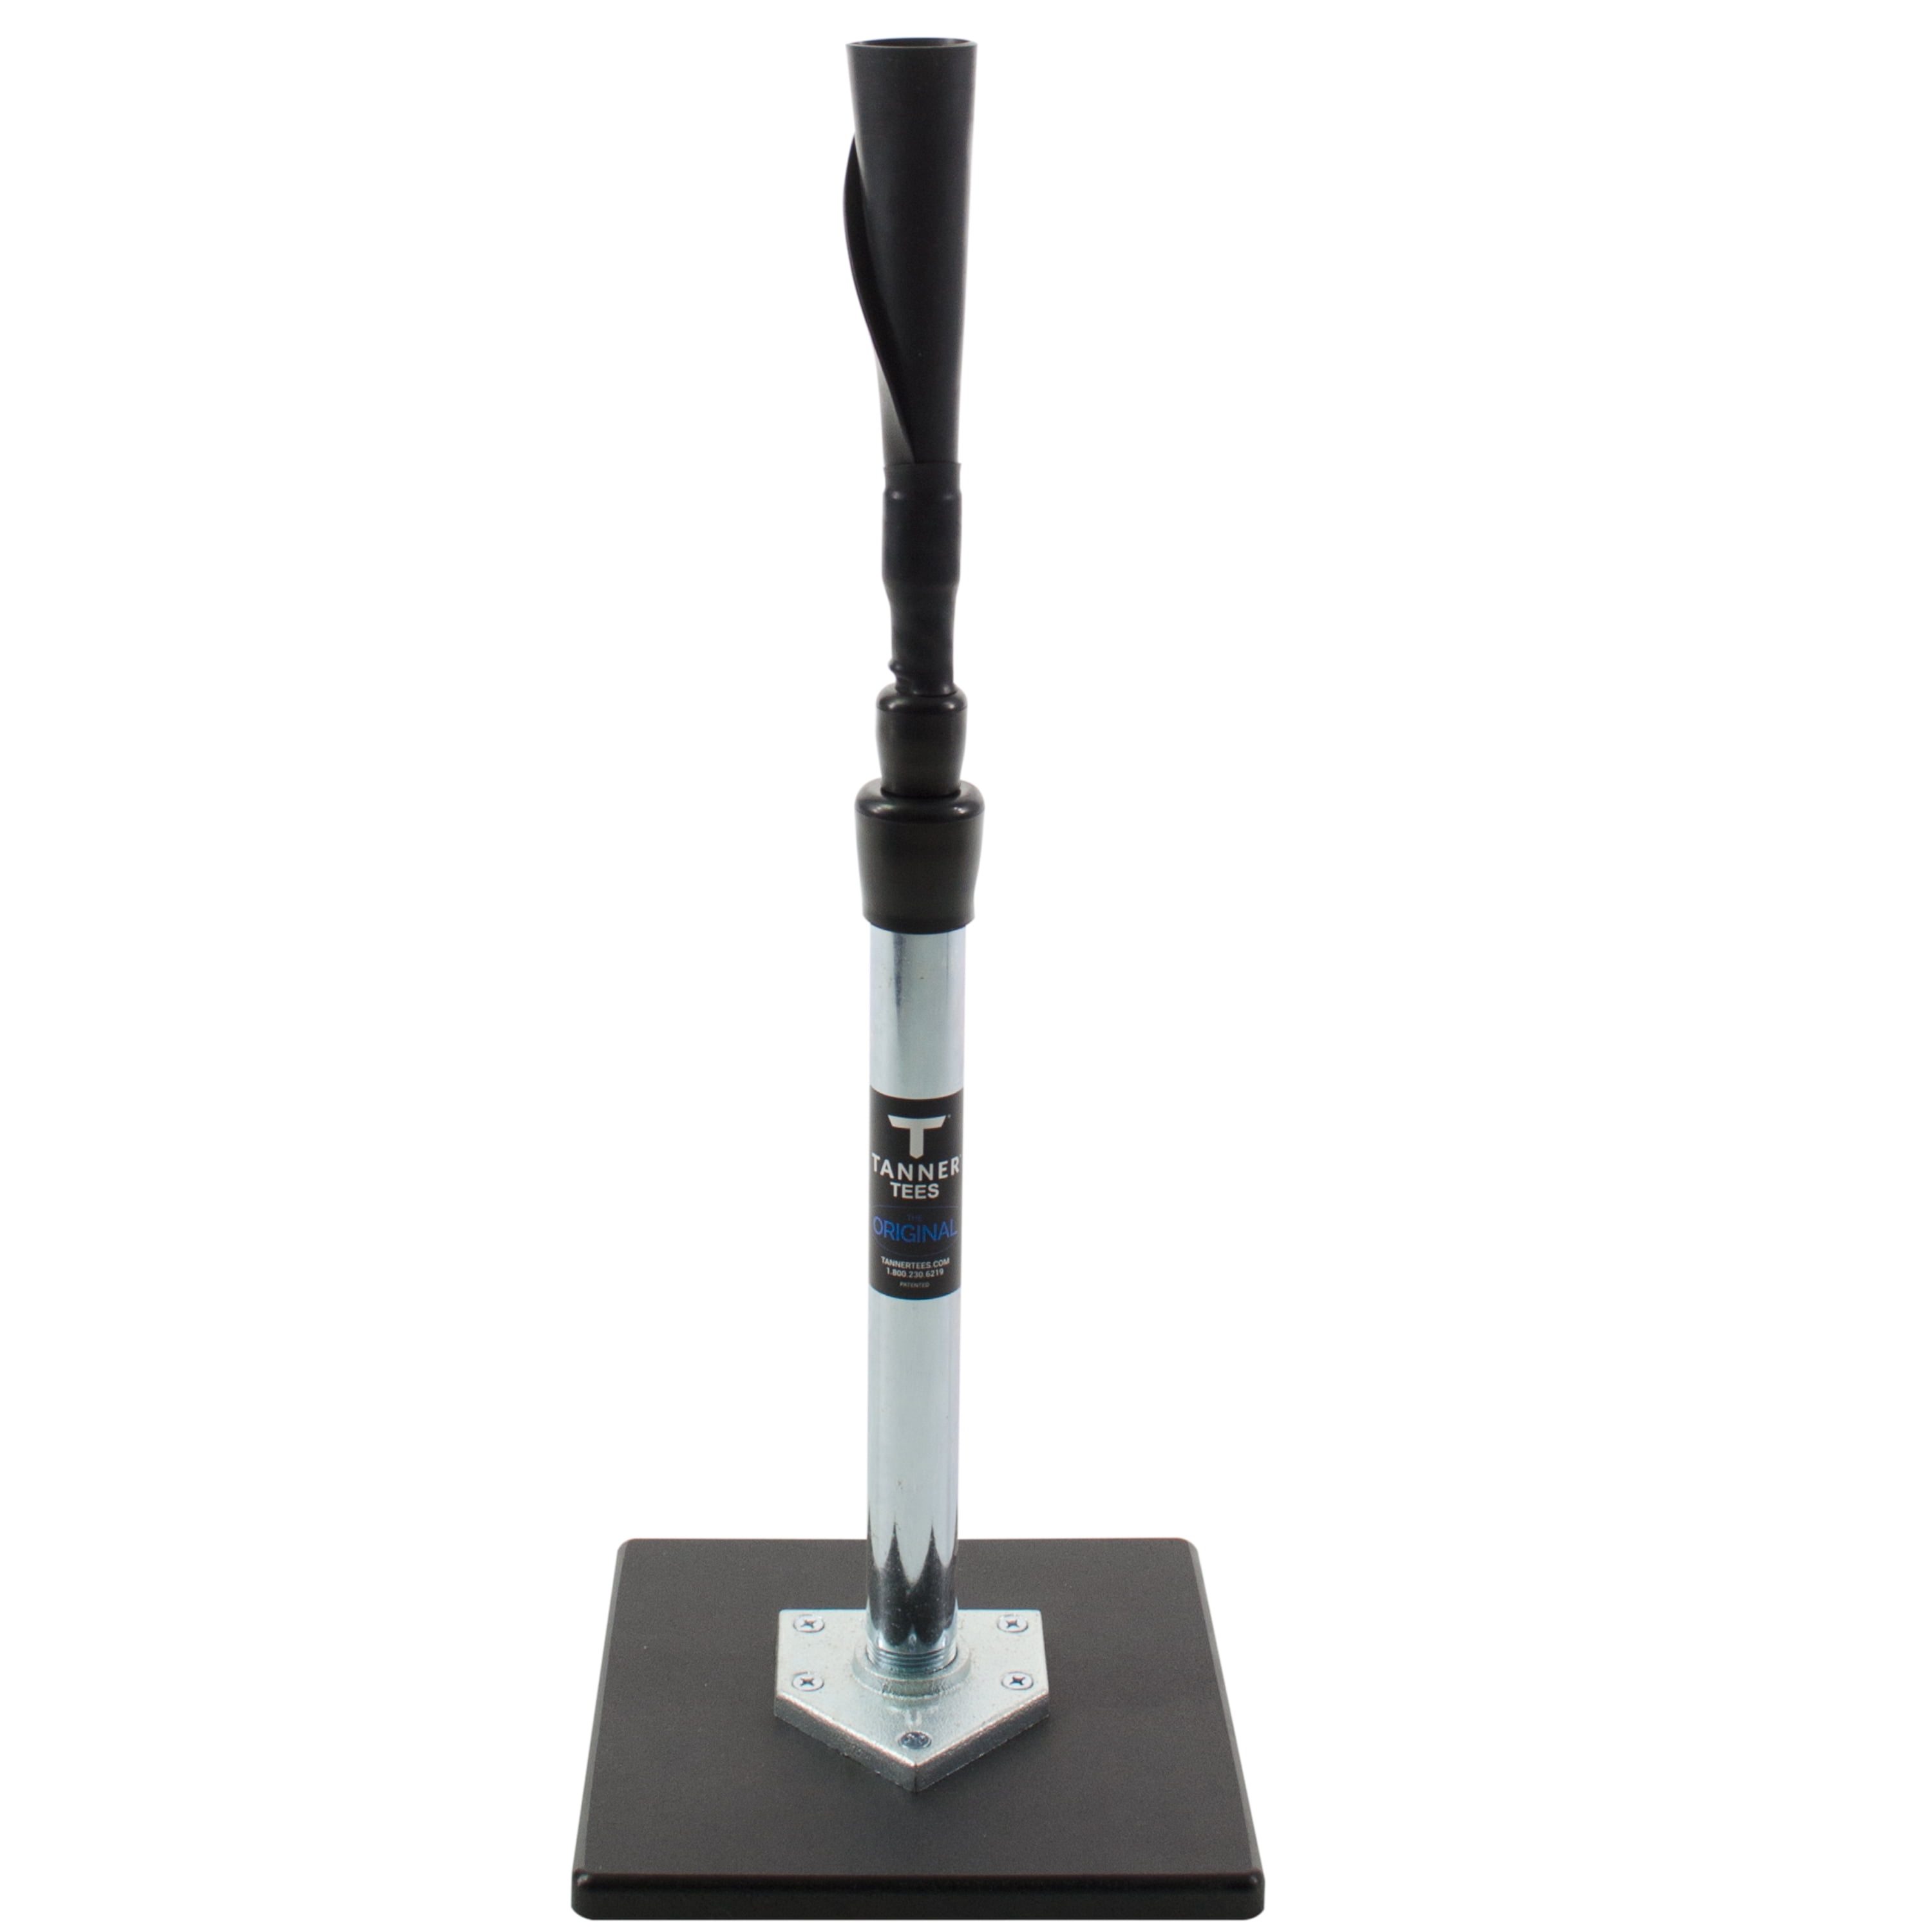 TANNER TEES the Original Premium Baseball/Softball Batting Tee with Tanner  Original Base, Patented Hand rolled Flex Top, and Easy Height Adjustments  ...